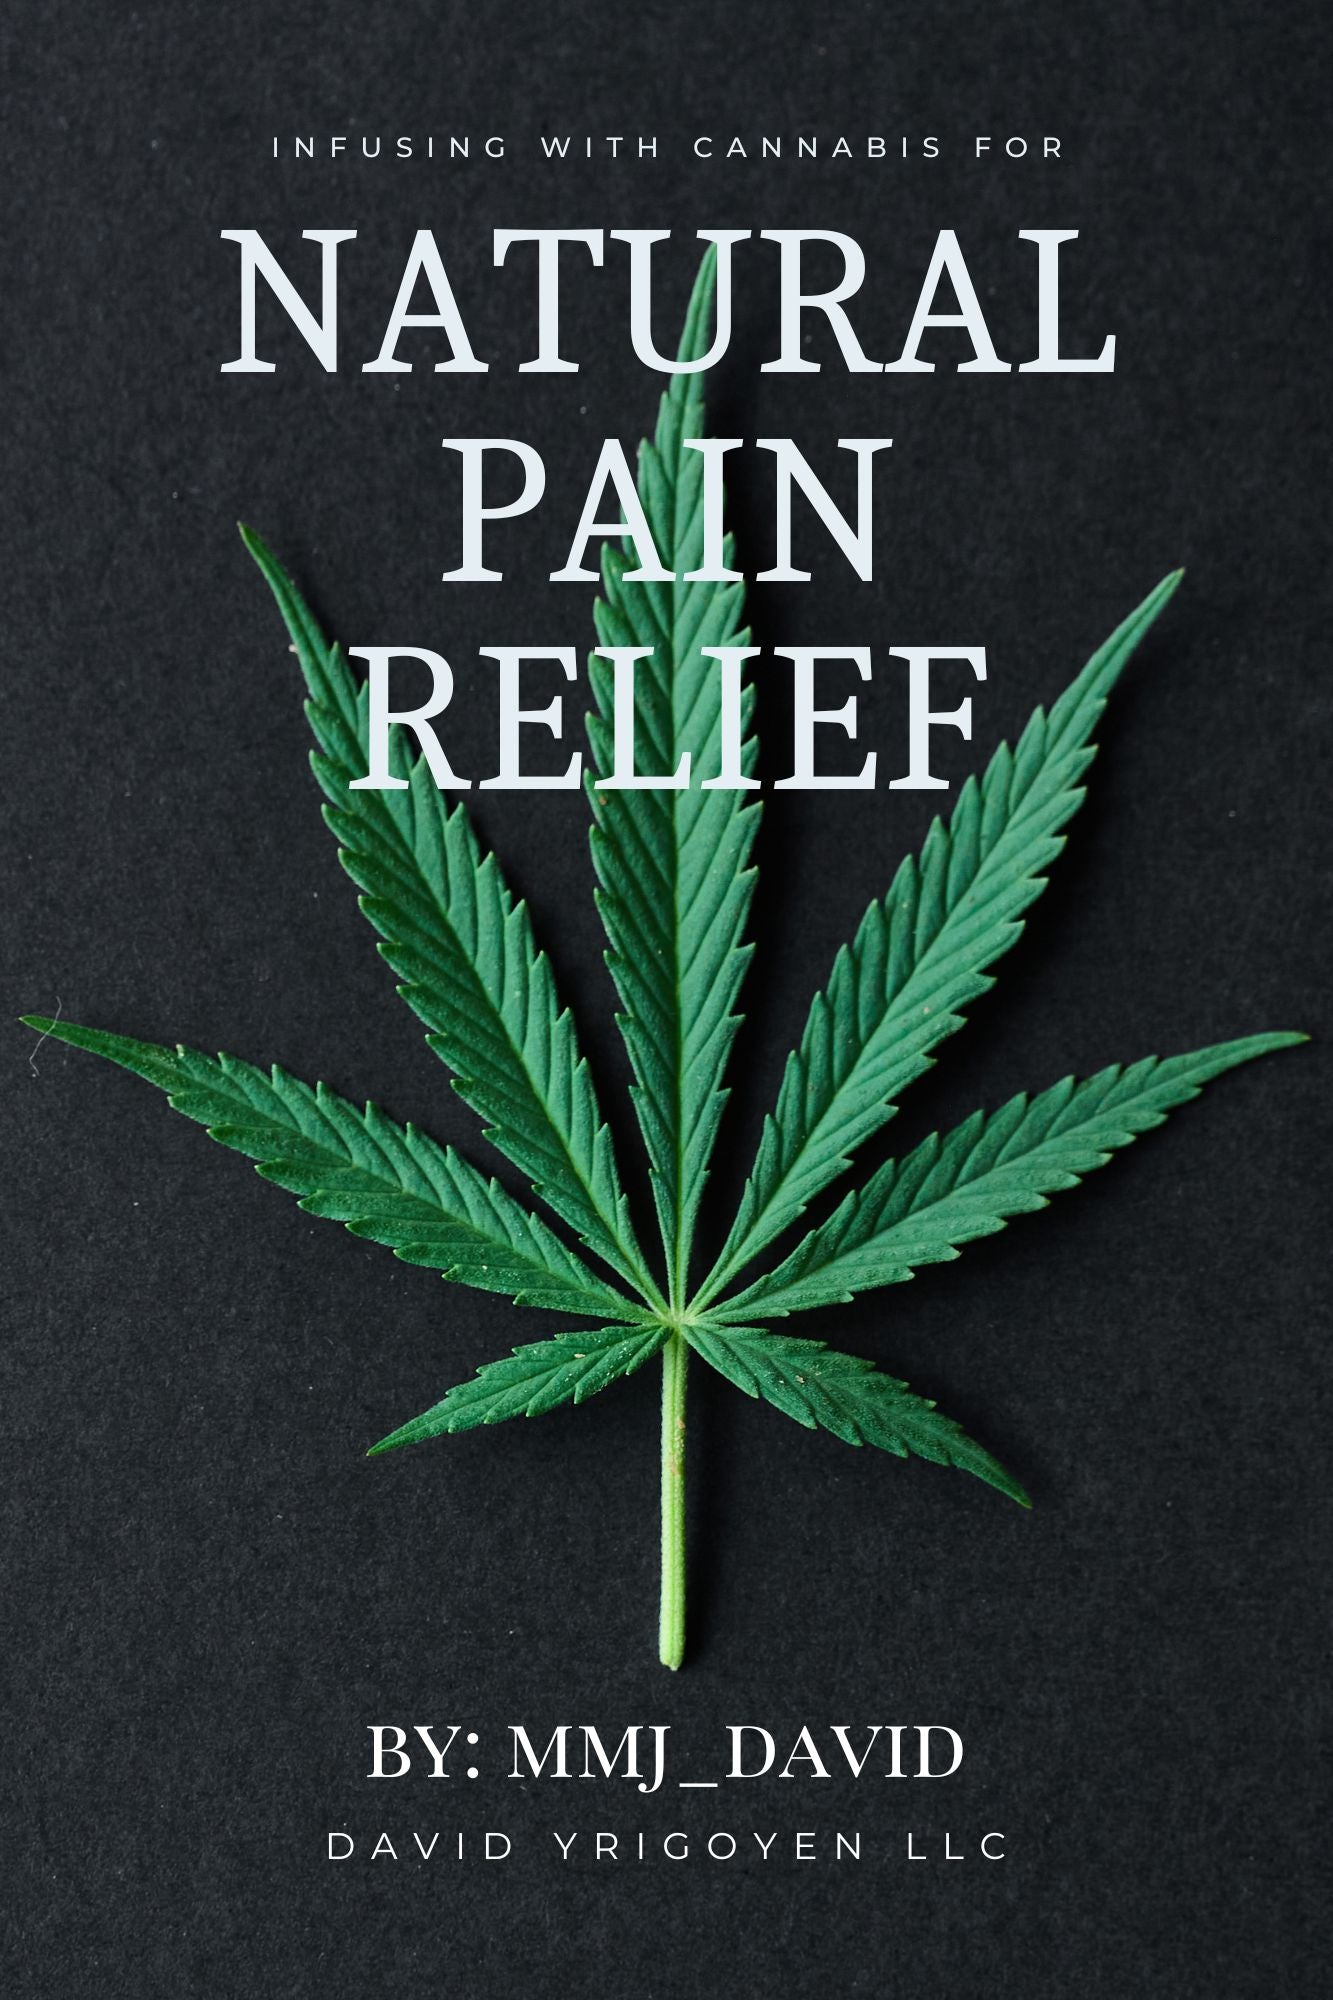 Infusing with Cannabis for Natural Pain Relief | By: MMJ_David